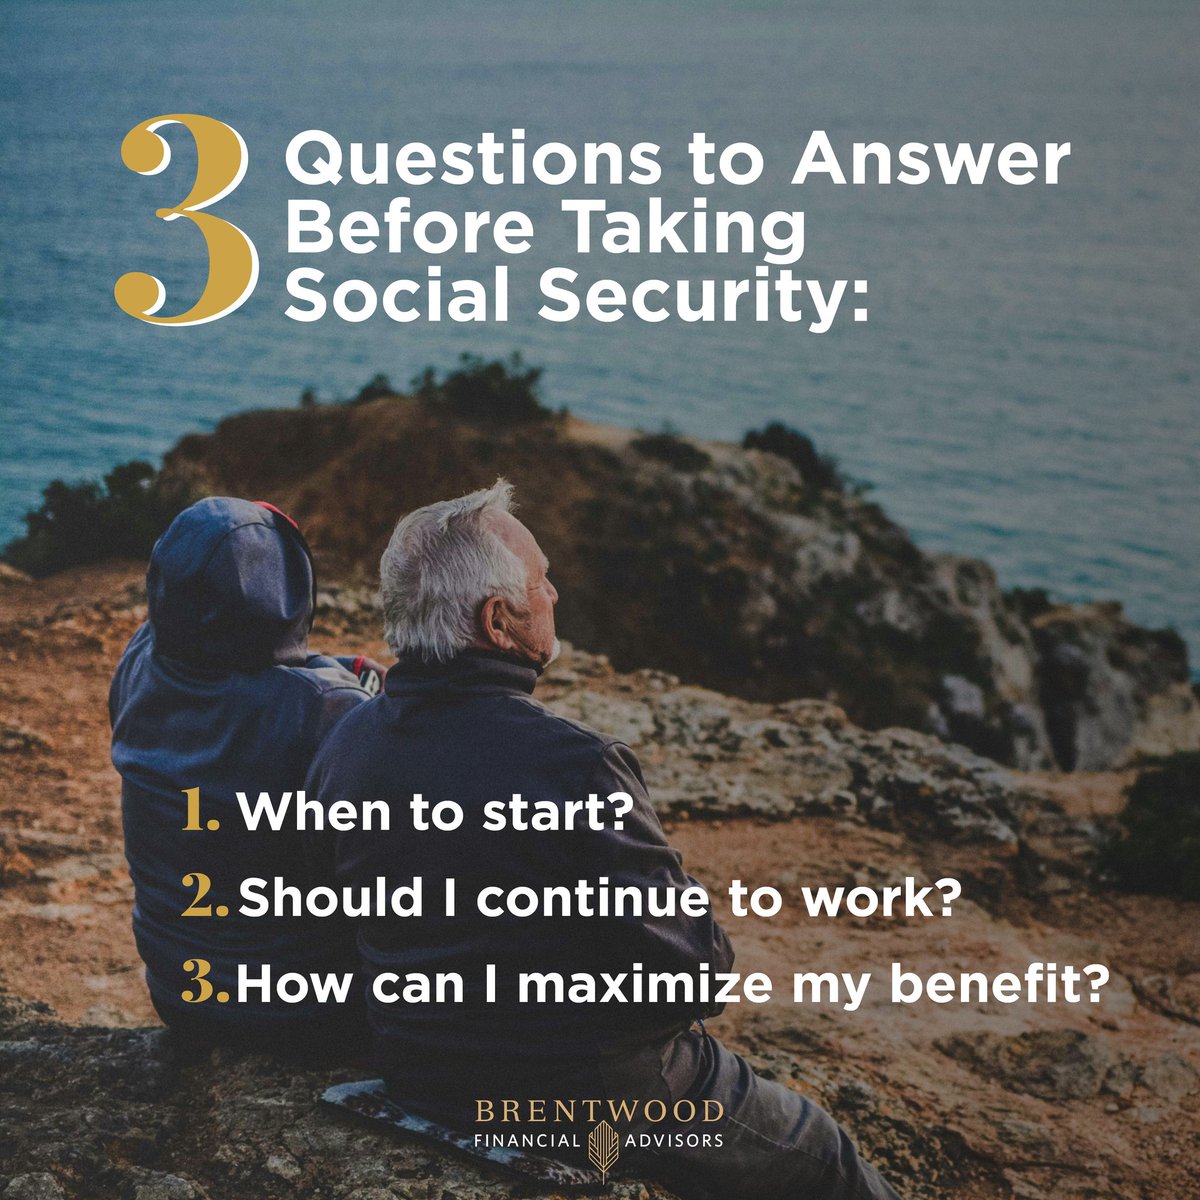 Social Security is a critical component of the retirement financial strategy for many Americans, so before you begin taking it, you should consider these three important questions...
bit.ly/31nU51g

#BrentwoodFinancial #FinancialAdvisors #WealthAdvice #FinancialServices